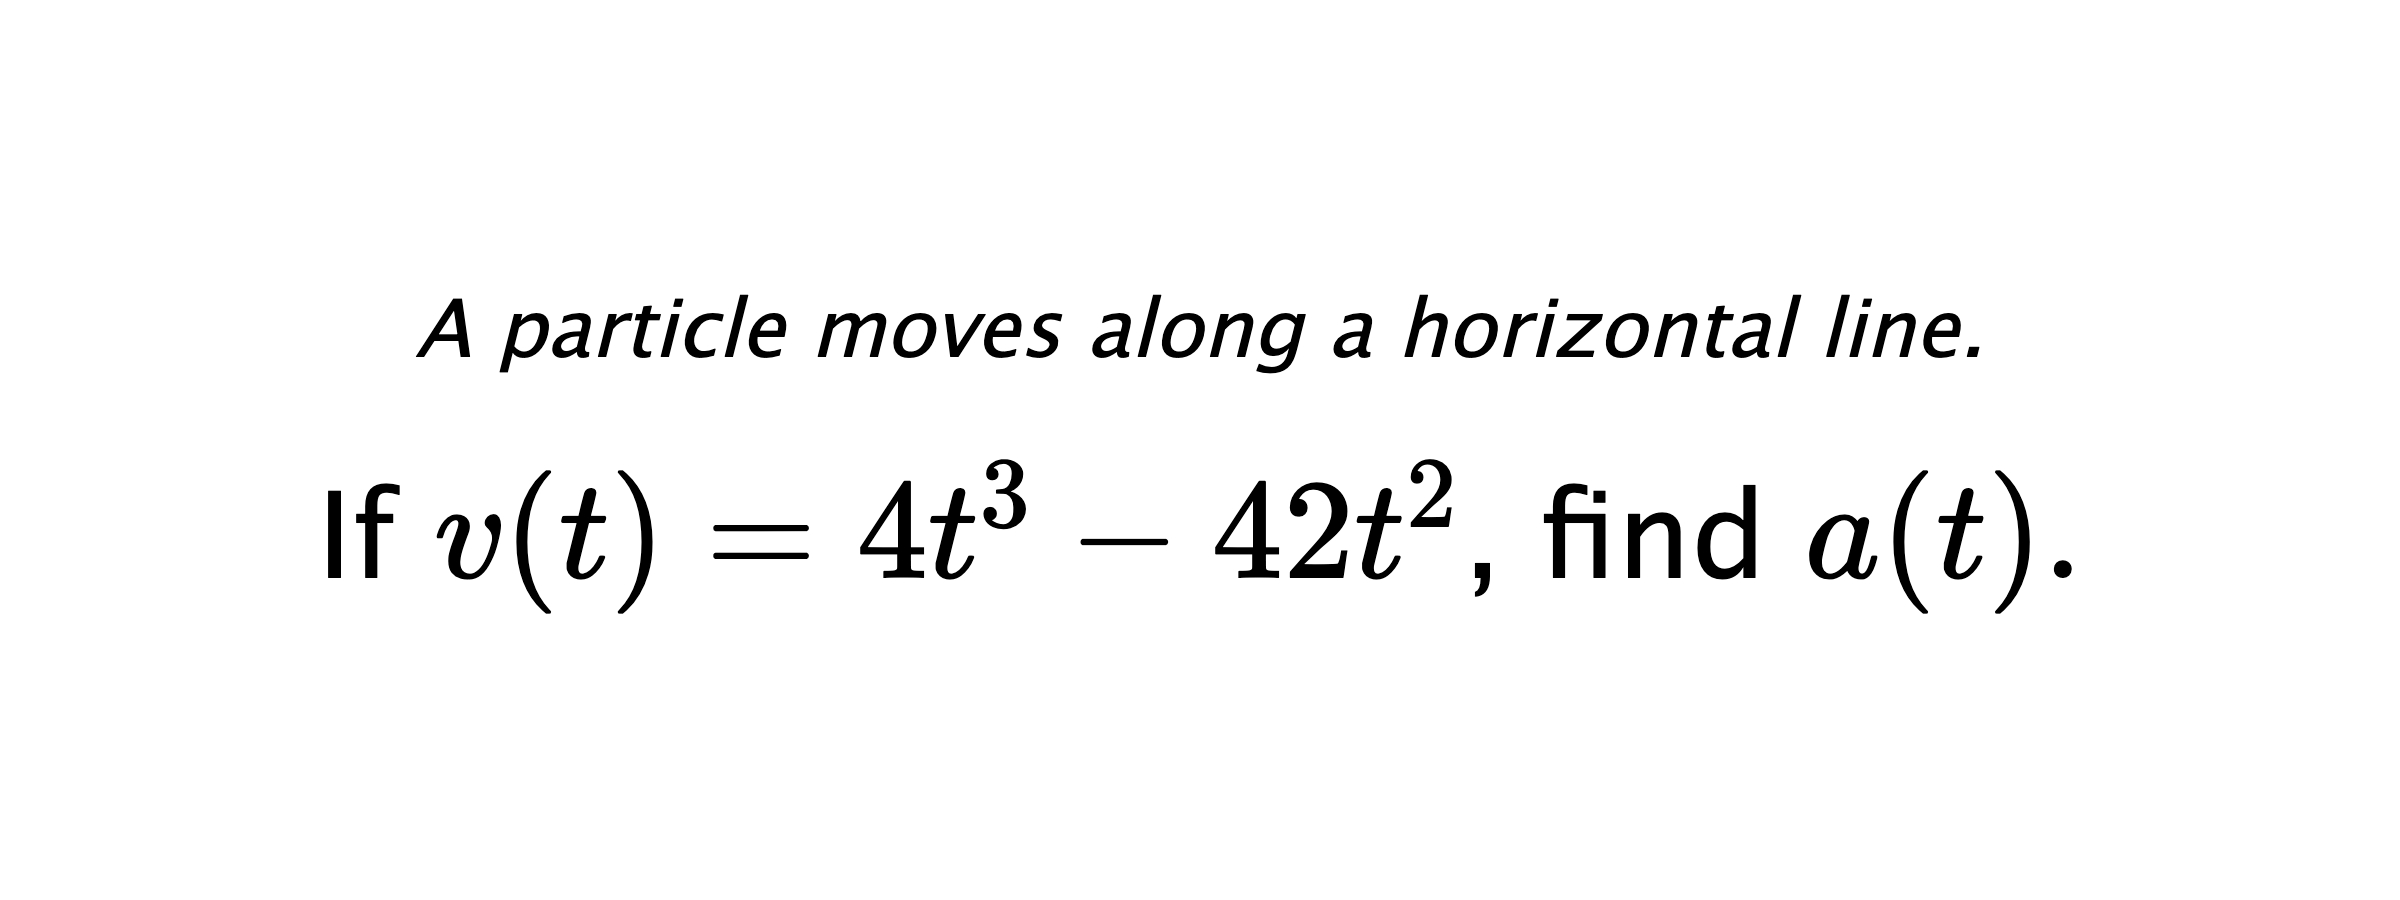 A particle moves along a horizontal line. If $ v(t)=4t^3-42t^2 $, find $ a(t). $